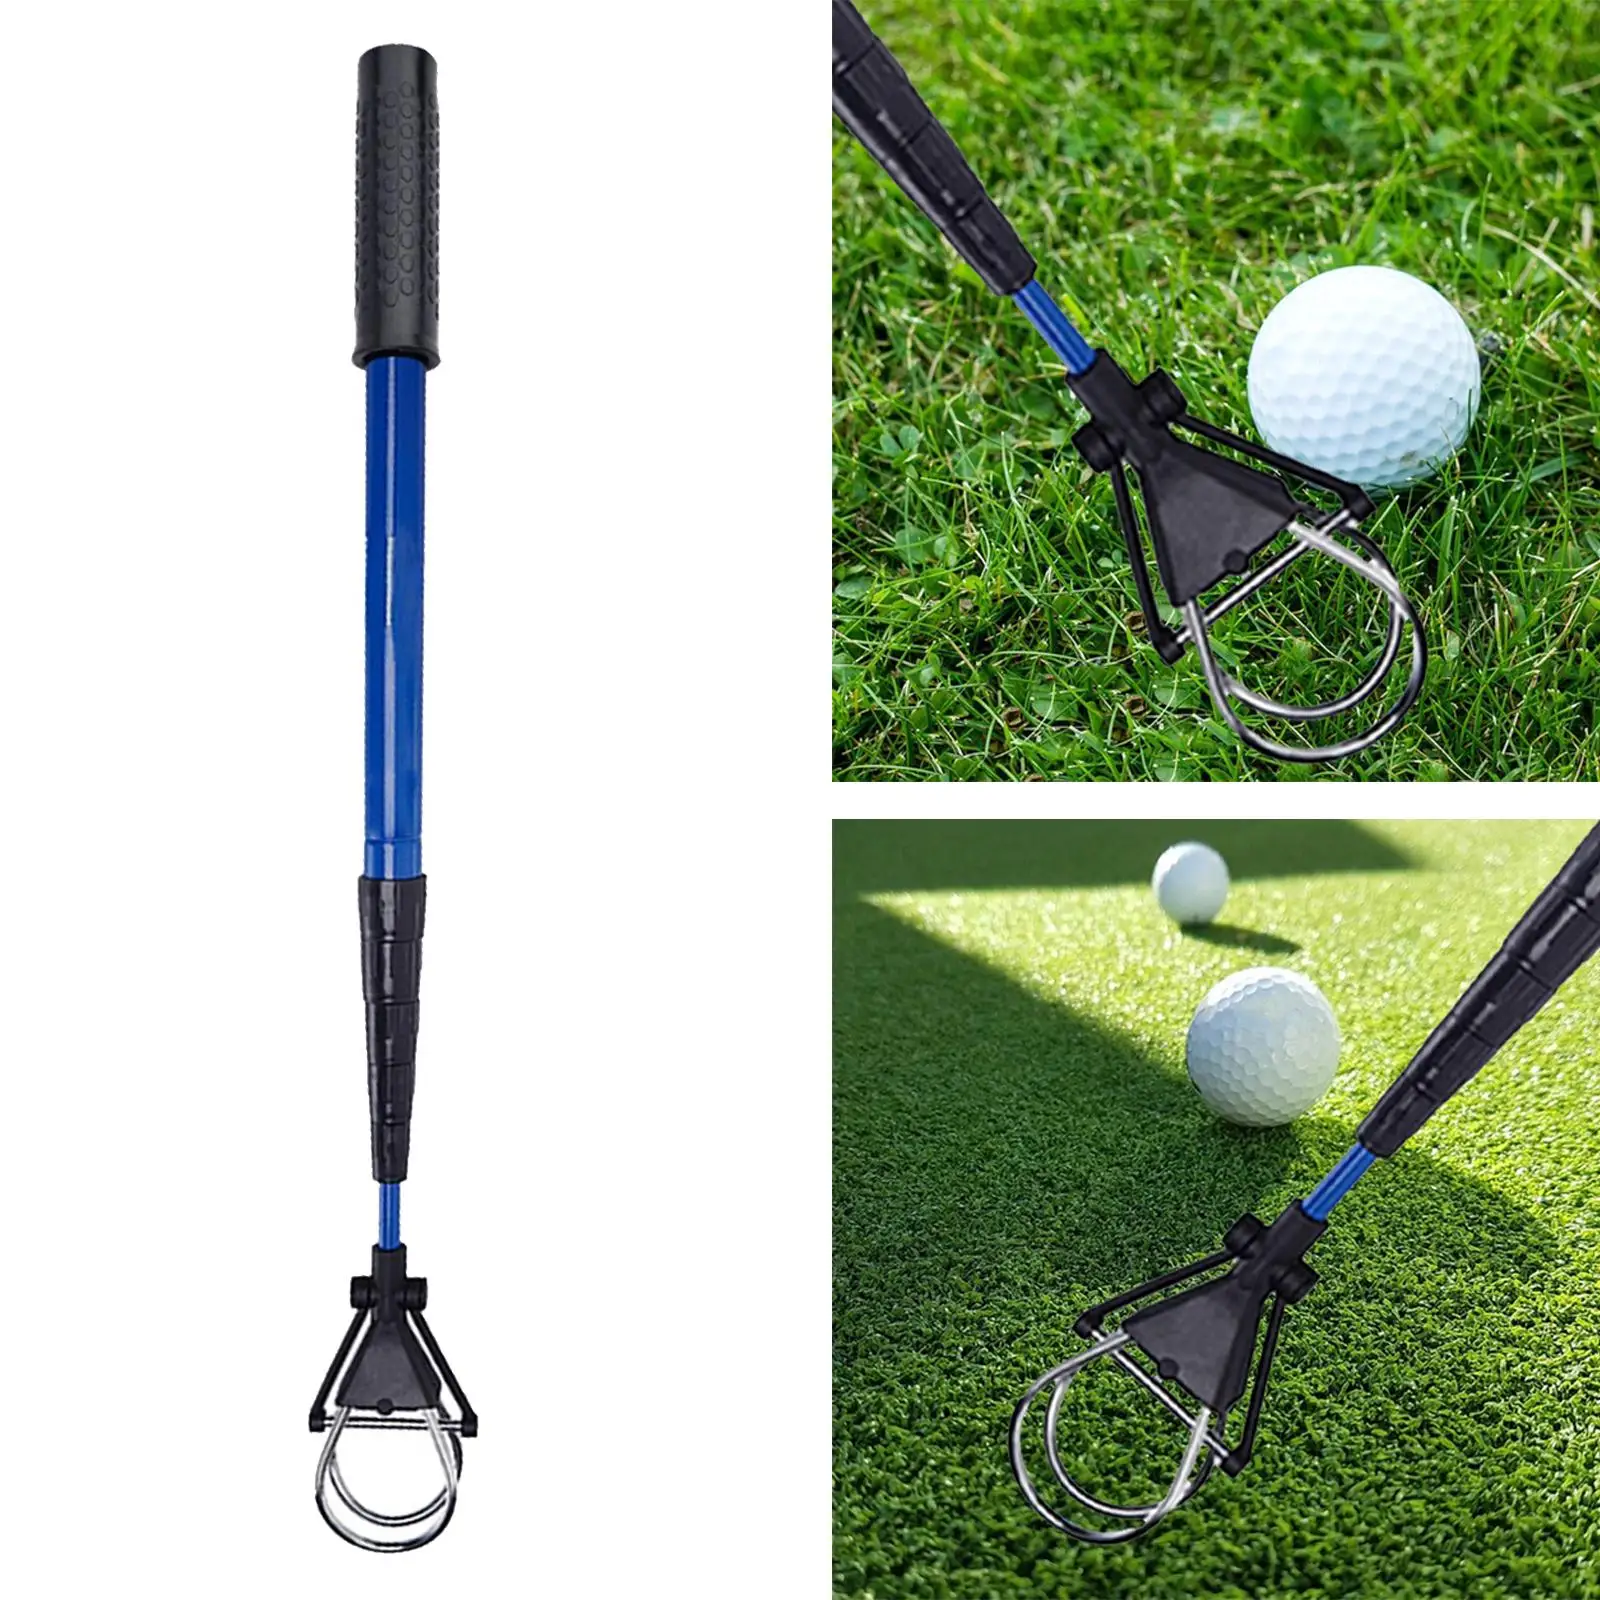 Portable Golf Ball Retriever Locking Shaft Practical Accessories Retractable Saver for Water Golfer Men Pick up Gift